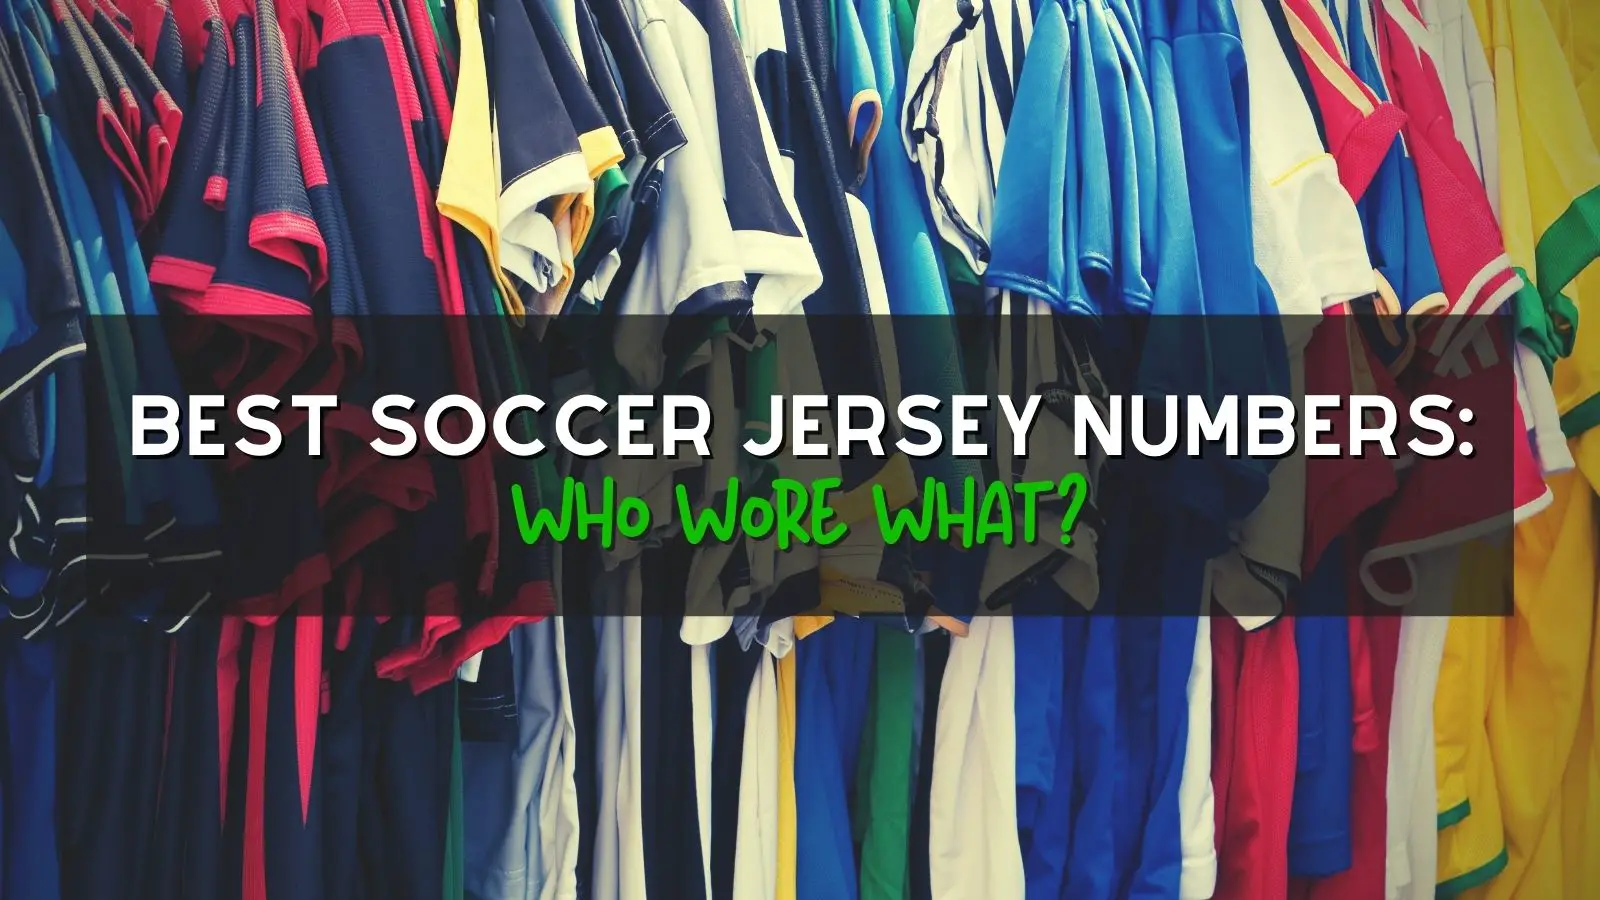 Best Soccer Jersey Numbers: Who Wore What?